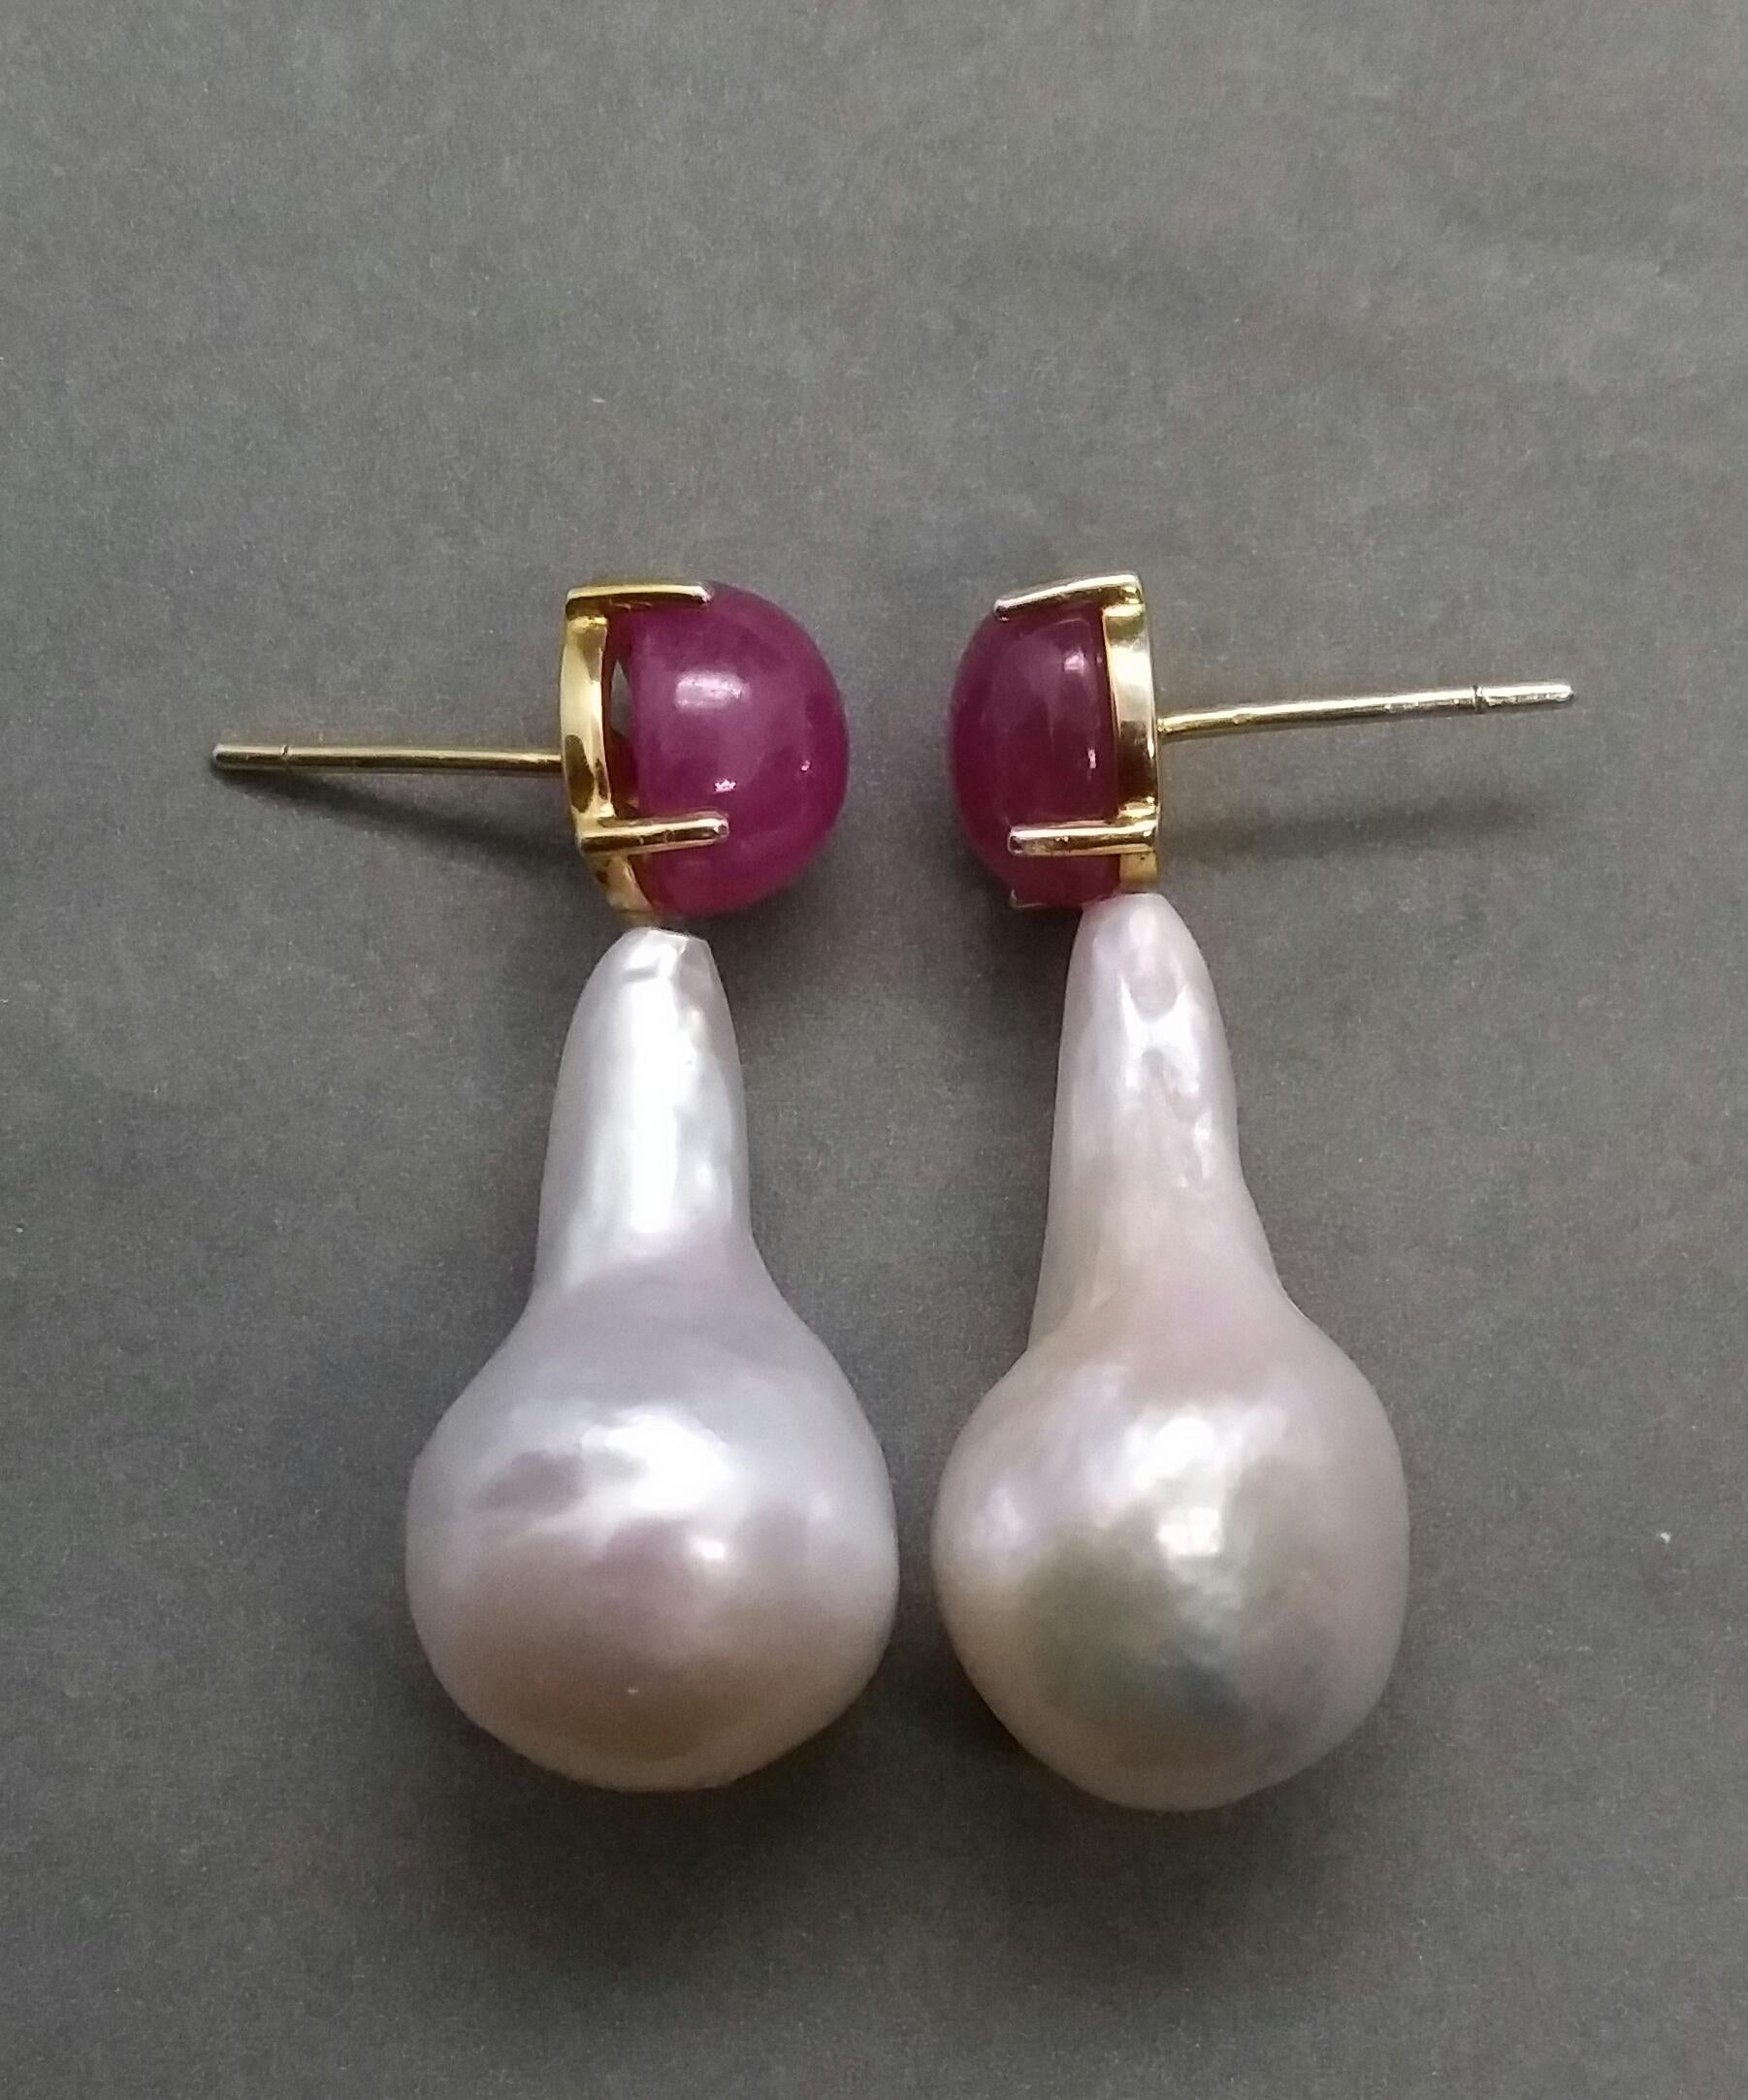 Big Size Pear Shape Baroque Pearls Oval Ruby Cabochon 14 Karat Gold Earrings For Sale 2